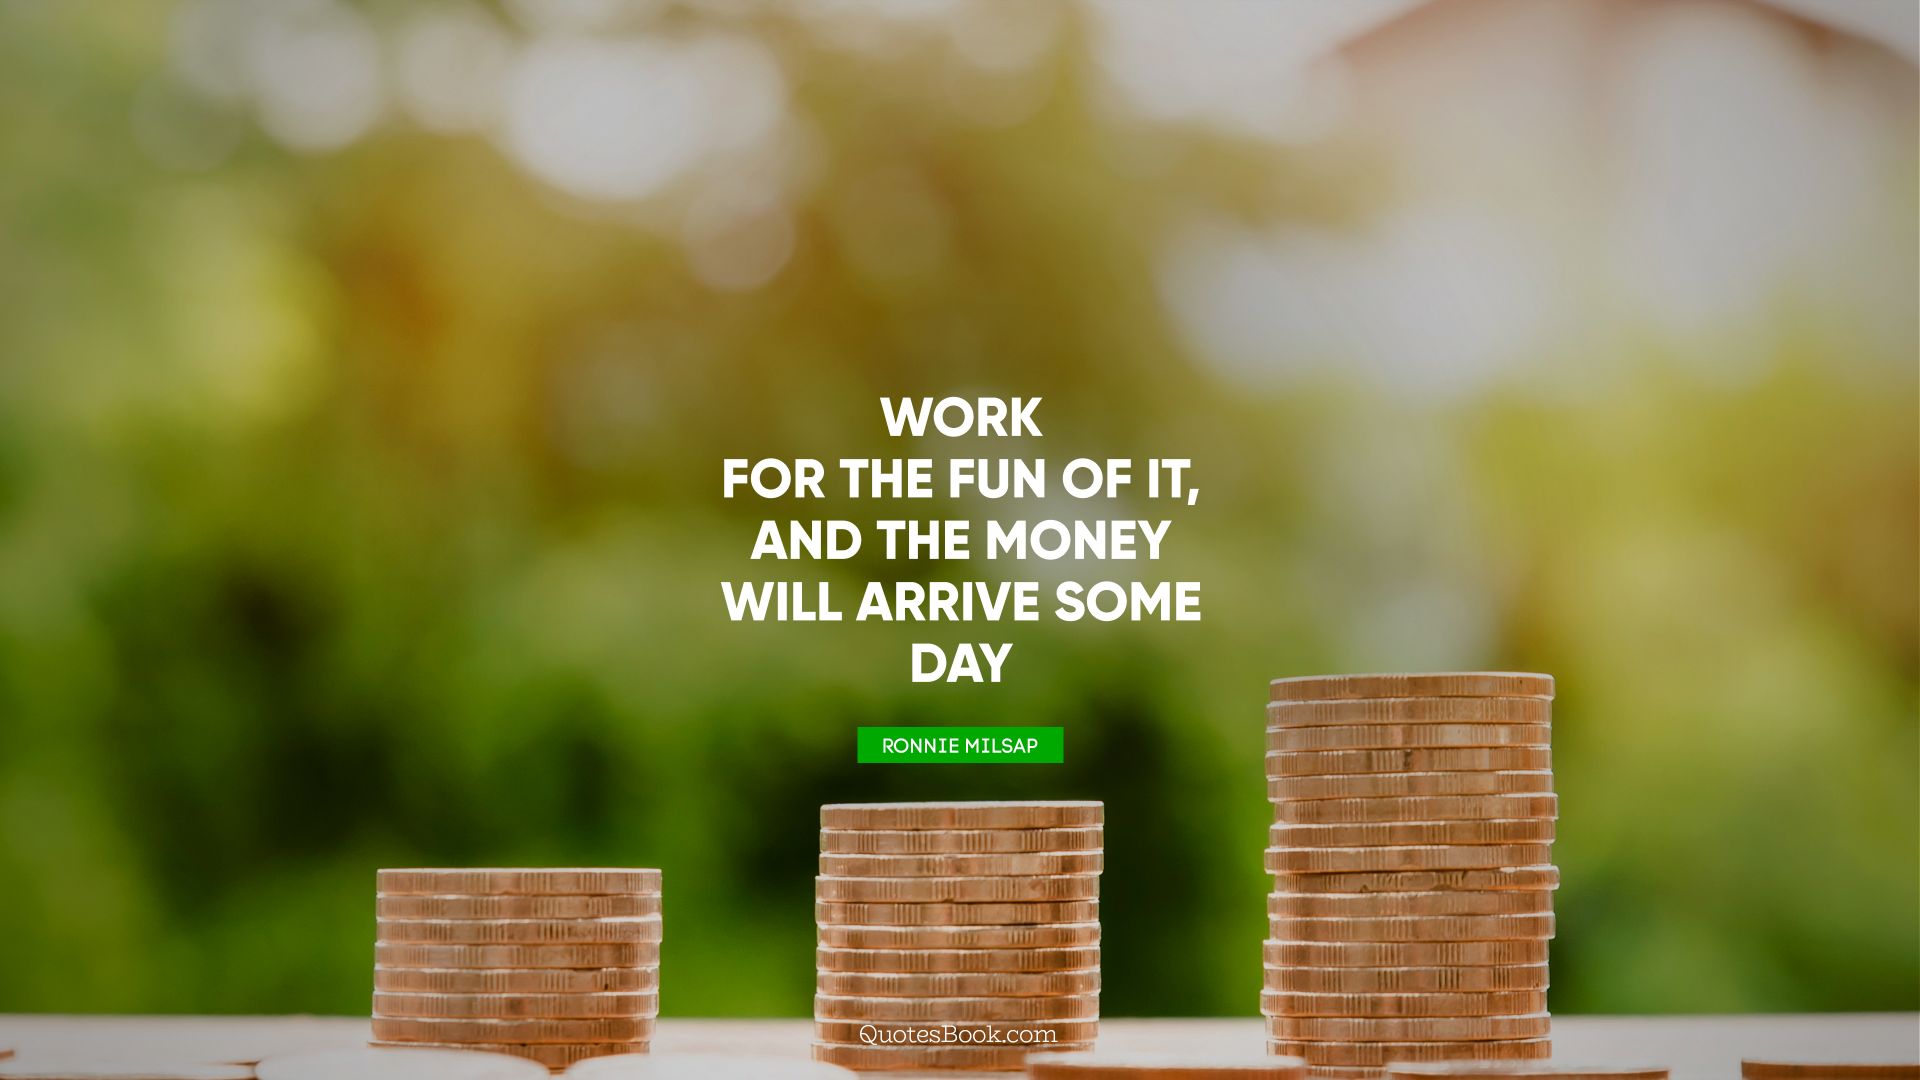 Work for the fun of it, and the money will arrive some day. - Quote by Ronnie Milsap